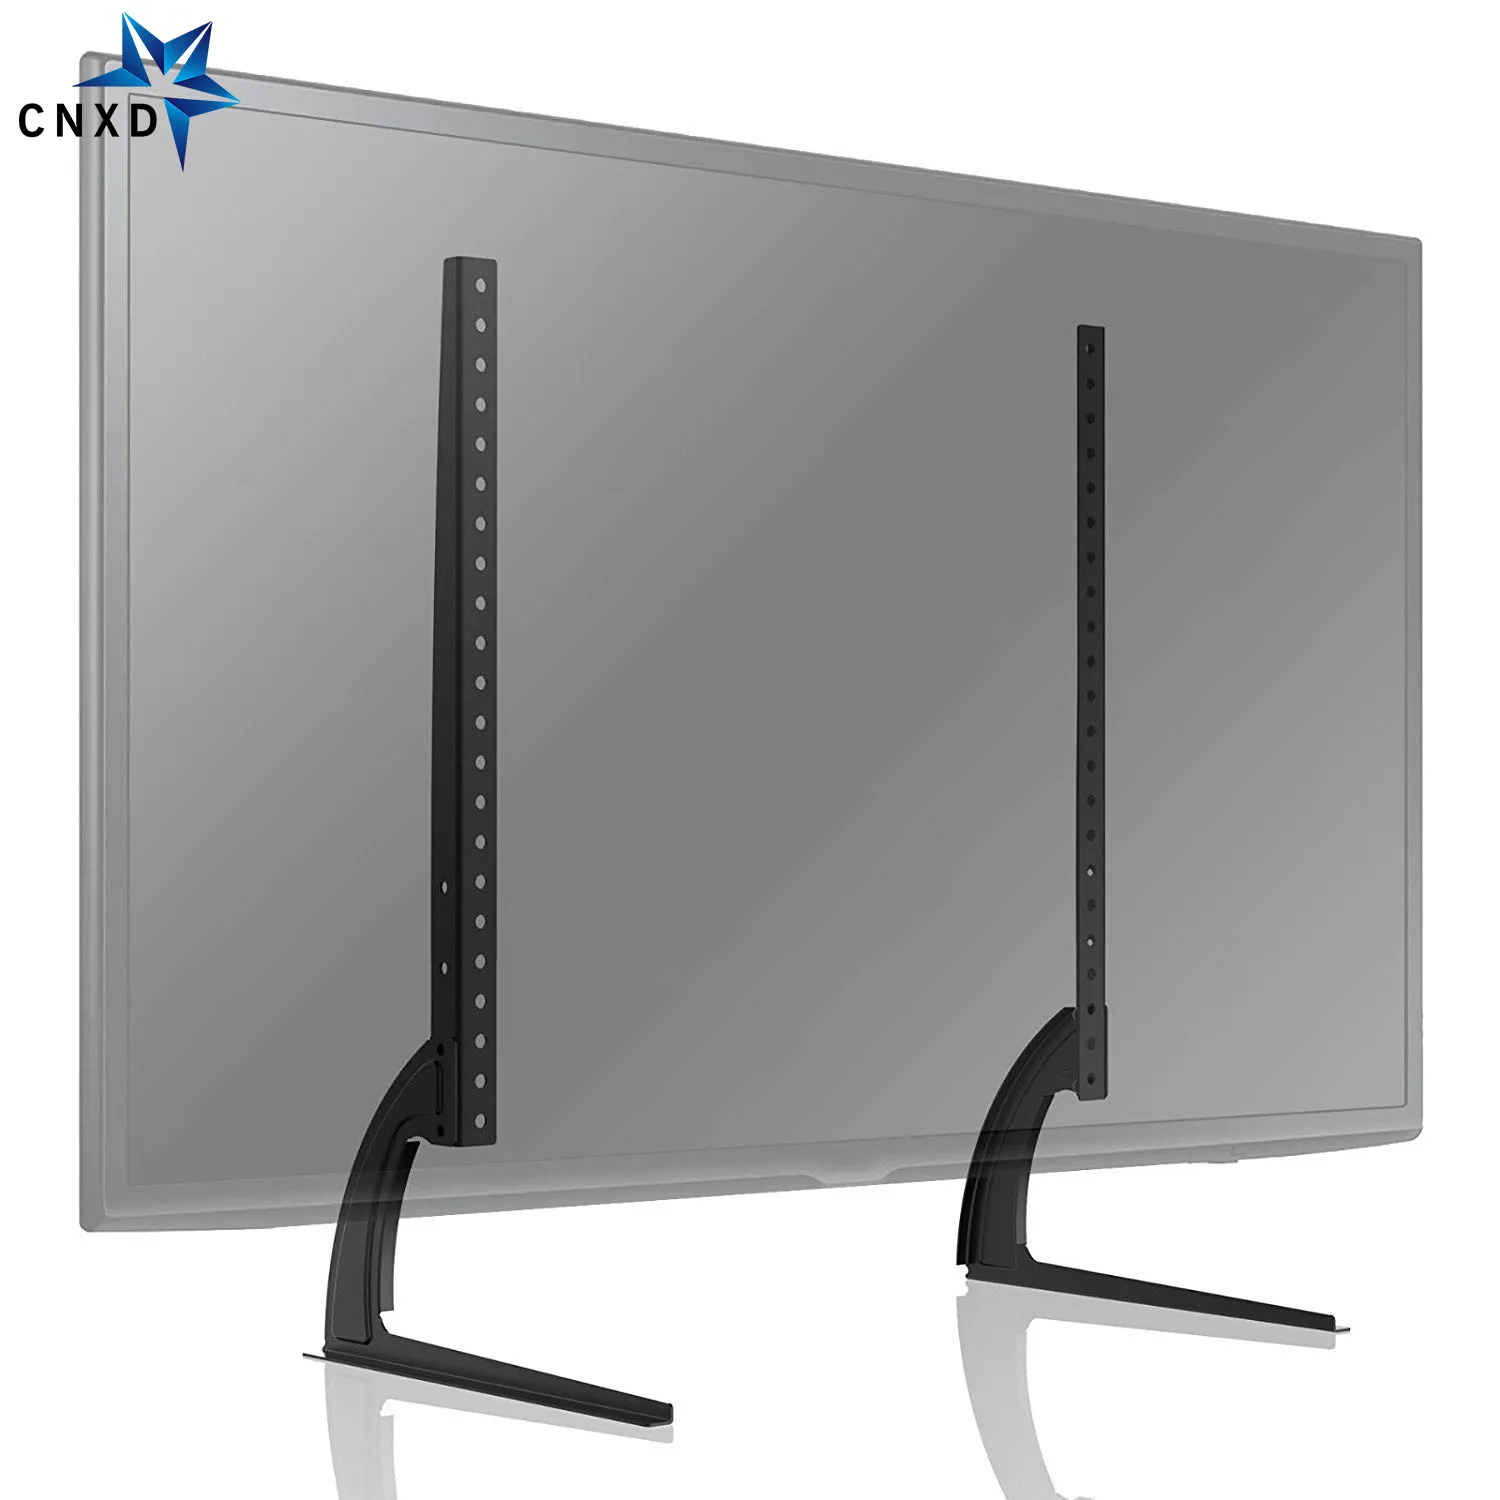 Holds up to 55kgs Screens Universal TV Stand/Base Tabletop TV Stand with Wall Mount for 32 to 65 inch 4 Level Height Adjustable HT03B-002P Heavy Duty Tempered Glass Base 